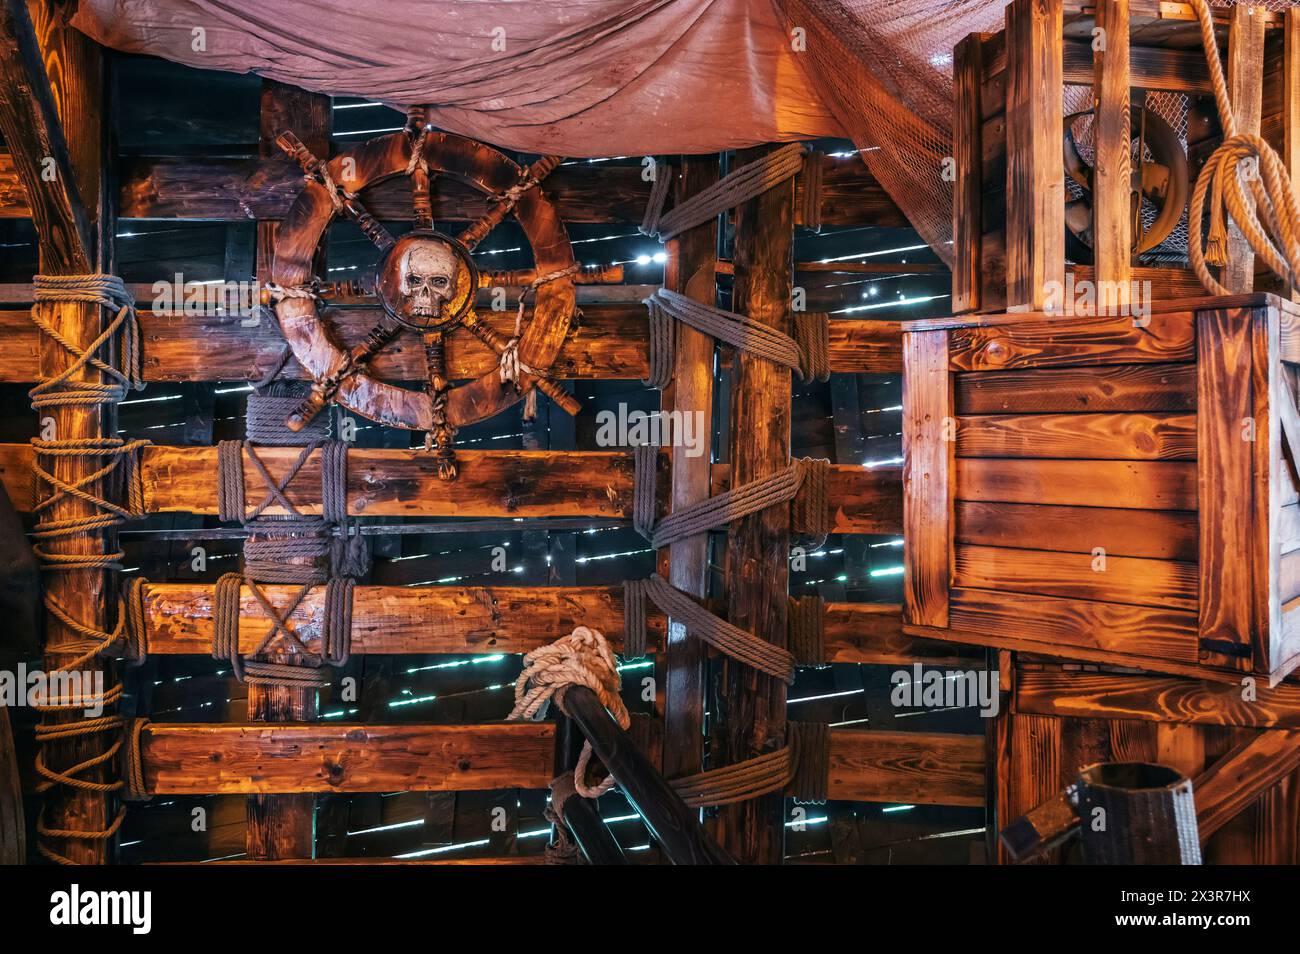 interior of captain cabin on an ancient medieval pirate ship with a wooden steering wheel with a pirate's skull emblem Stock Photo